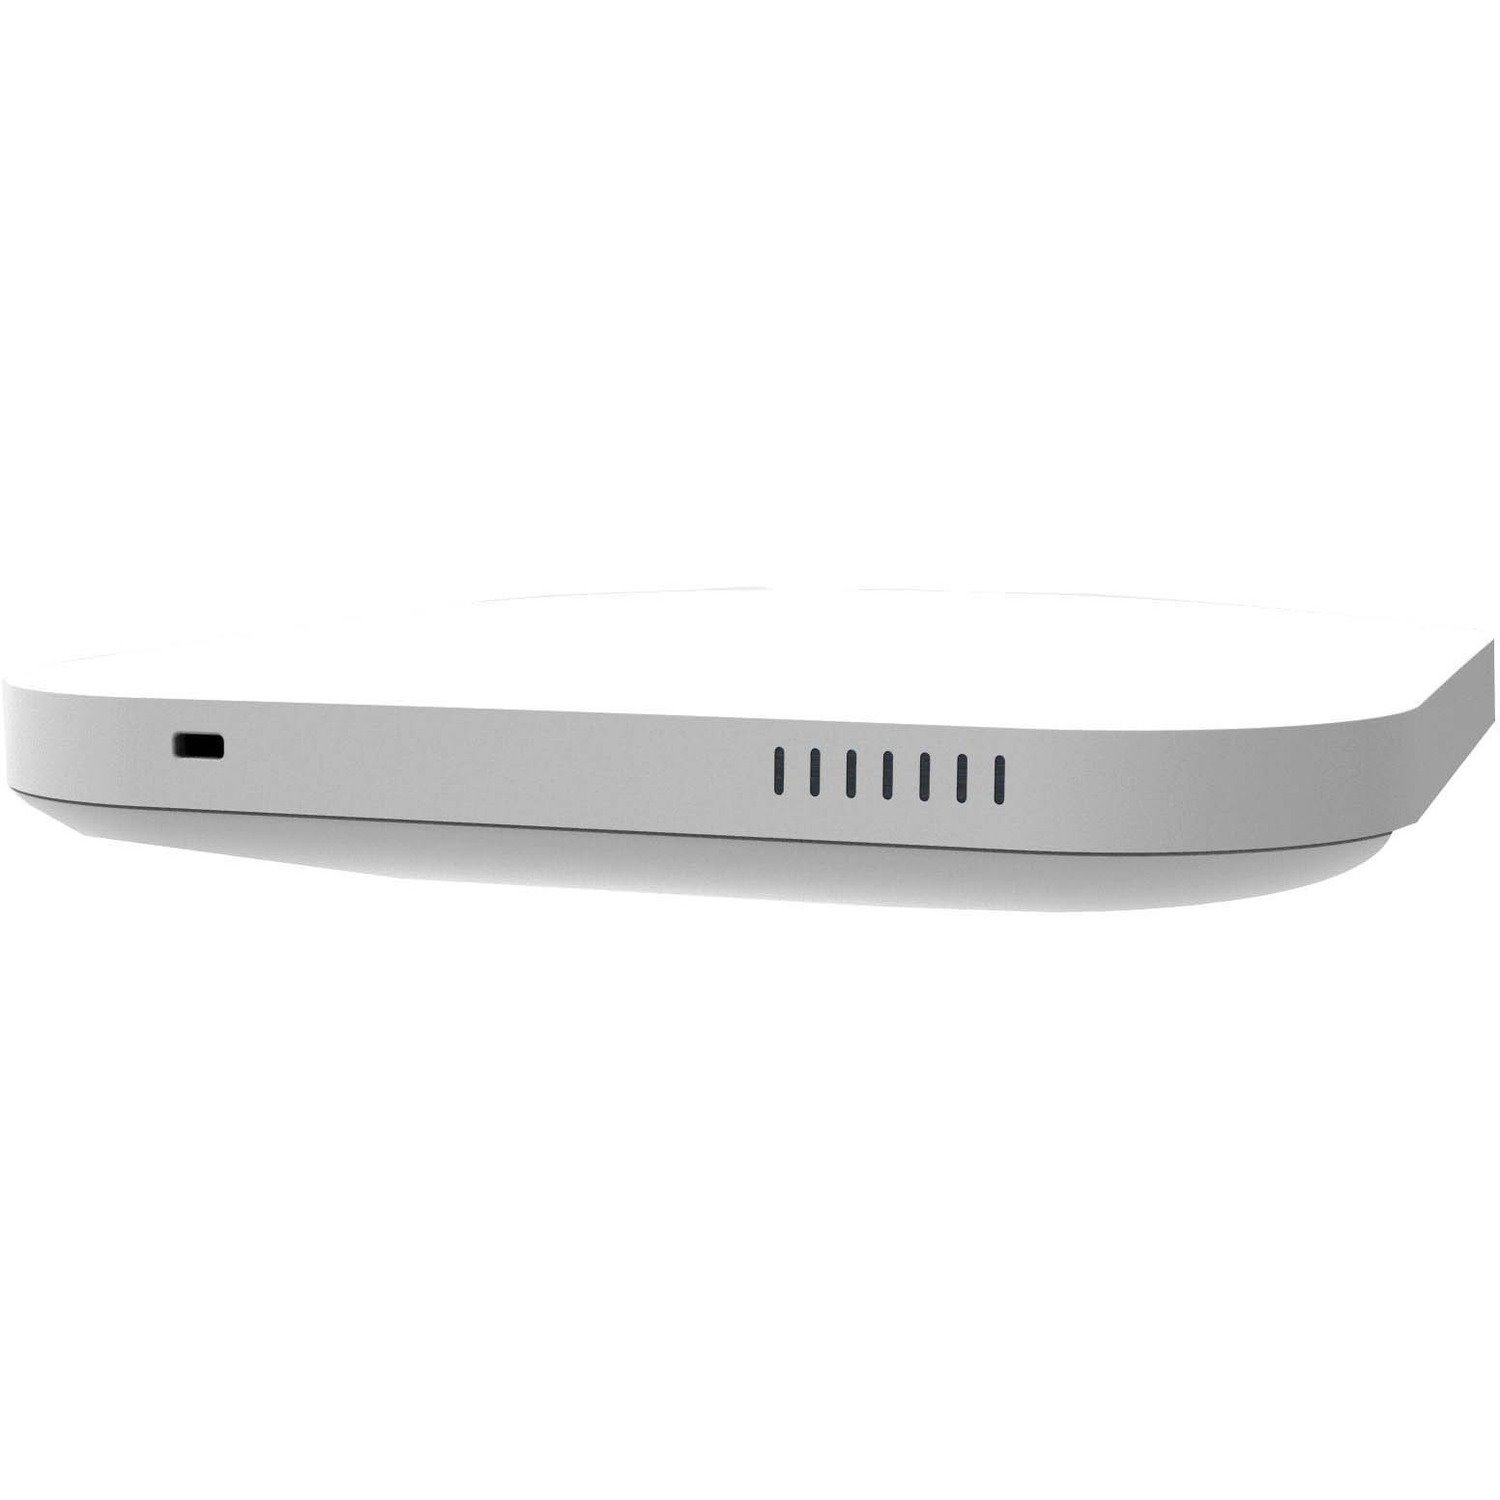 SonicWall SonicWave 641 Dual Band IEEE 802.11 a/b/g/n/ac/ax Wireless Access Point - Indoor - TAA Compliant